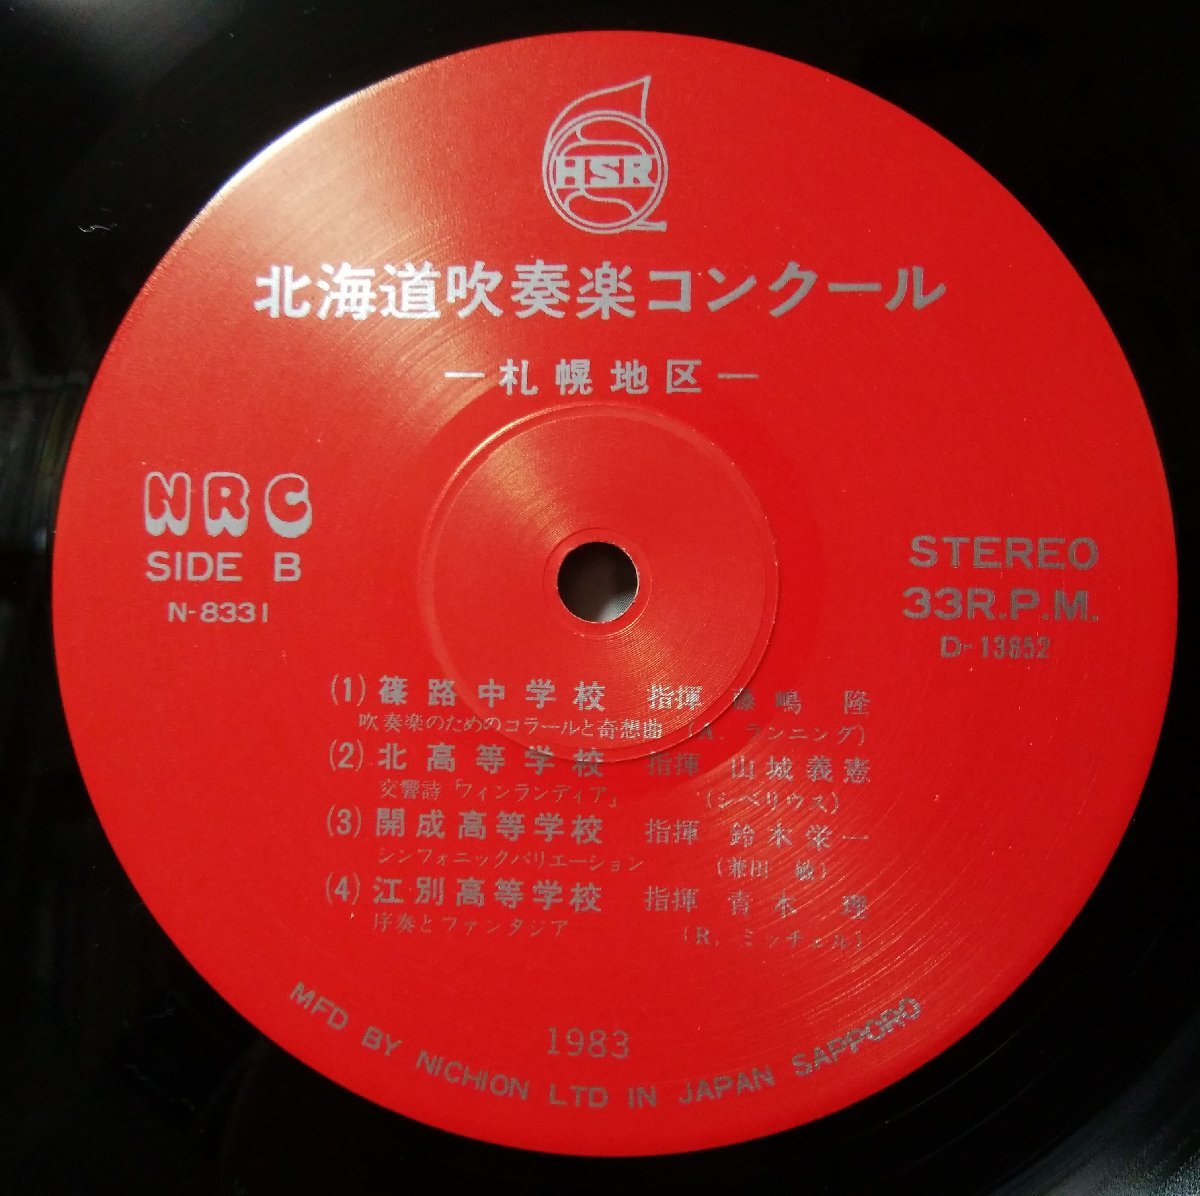 ** Showa era 58 fiscal year Hokkaido wind instrumental music navy blue cool district convention *1983 year real . recording record * self . work record not for sale * analogue record [2140TPR